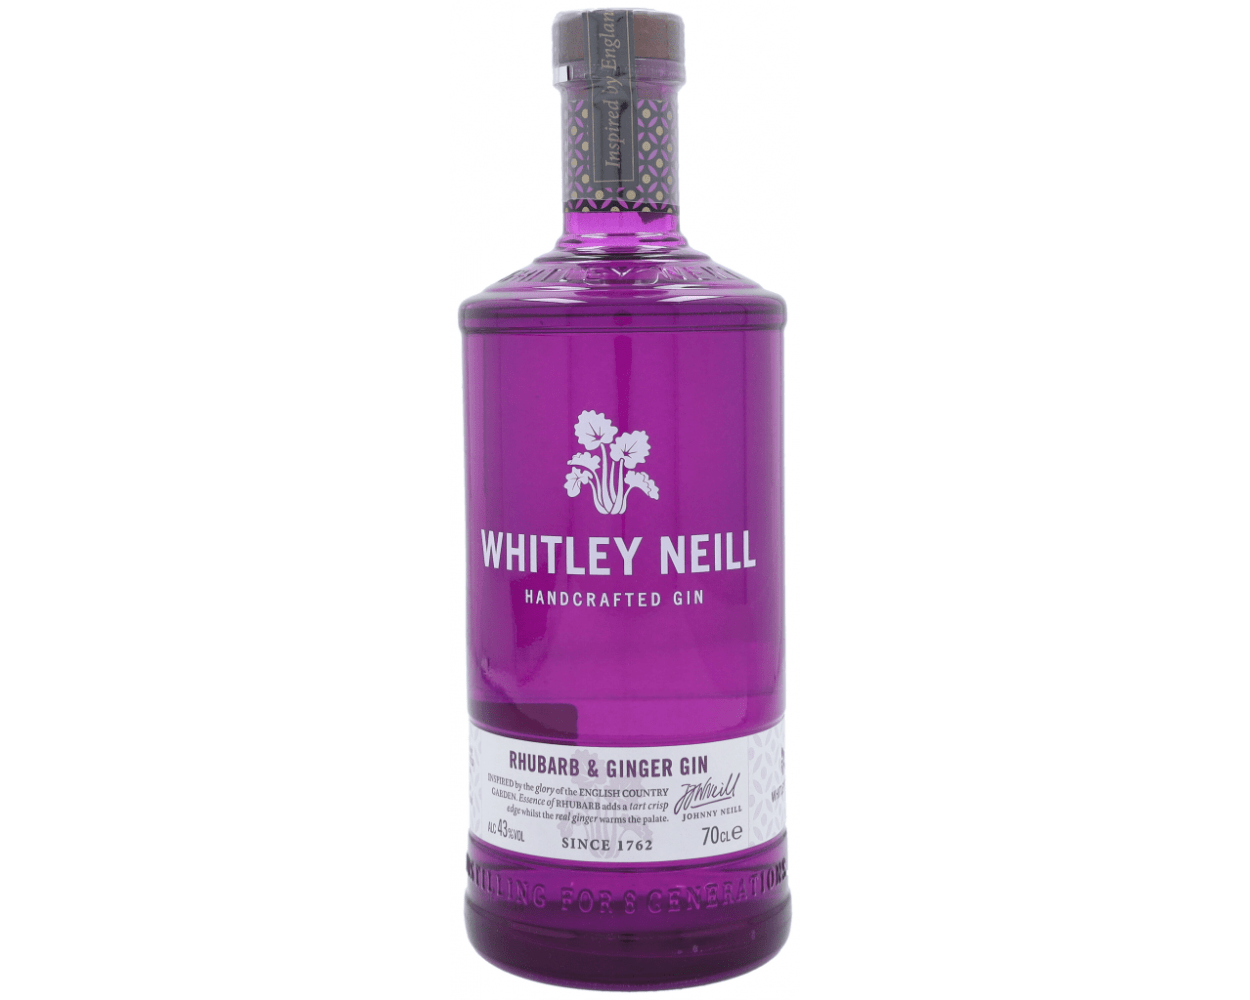 Whitley Neill Rhubarb & Ginger Gin 70cl. 43°